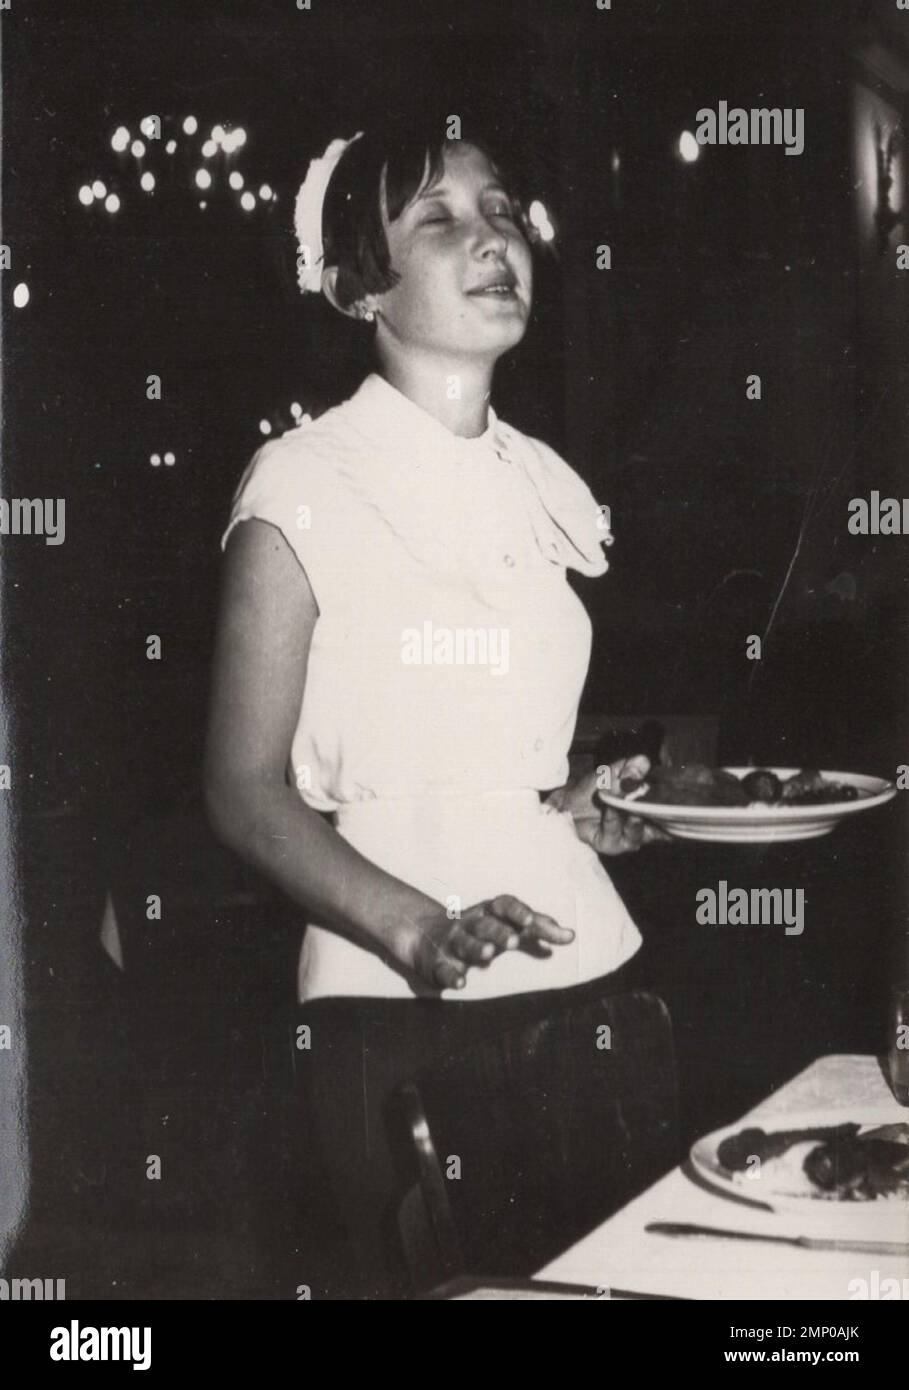 vintage moment / vintage funny moment / vintage photograph / power of the moment / magic moments / vintage eating / eating / feeling the flow or a simple waitress who is enjoying her job. Possibly it is a busy day in the restaurant at the 1950s. Stock Photo